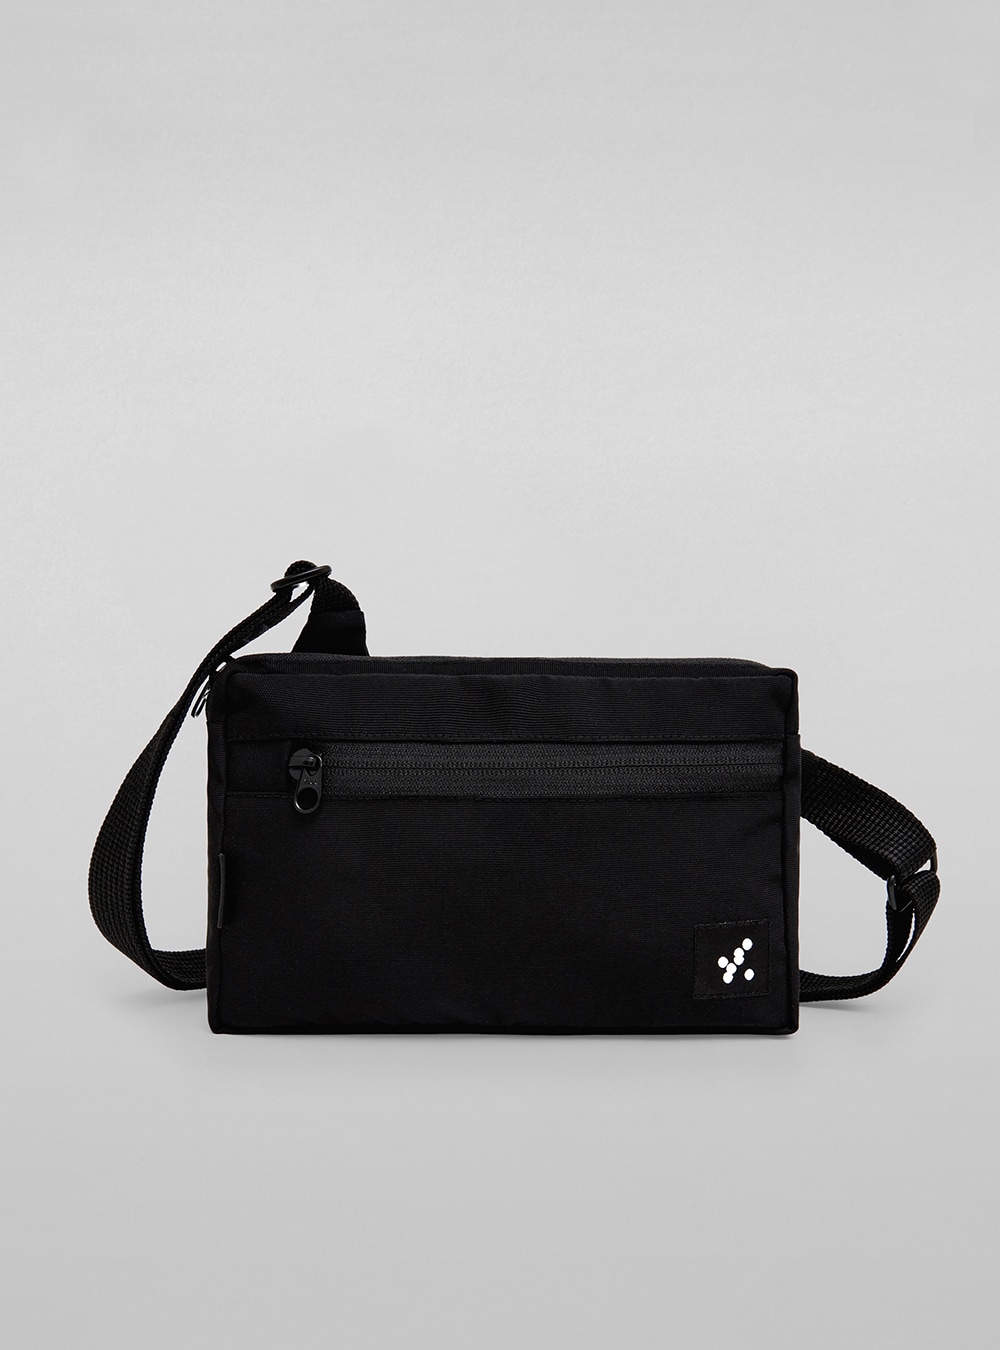 Recycled crossbody bag (black) in recycled marine plastic, made in portugal by wetheknot.